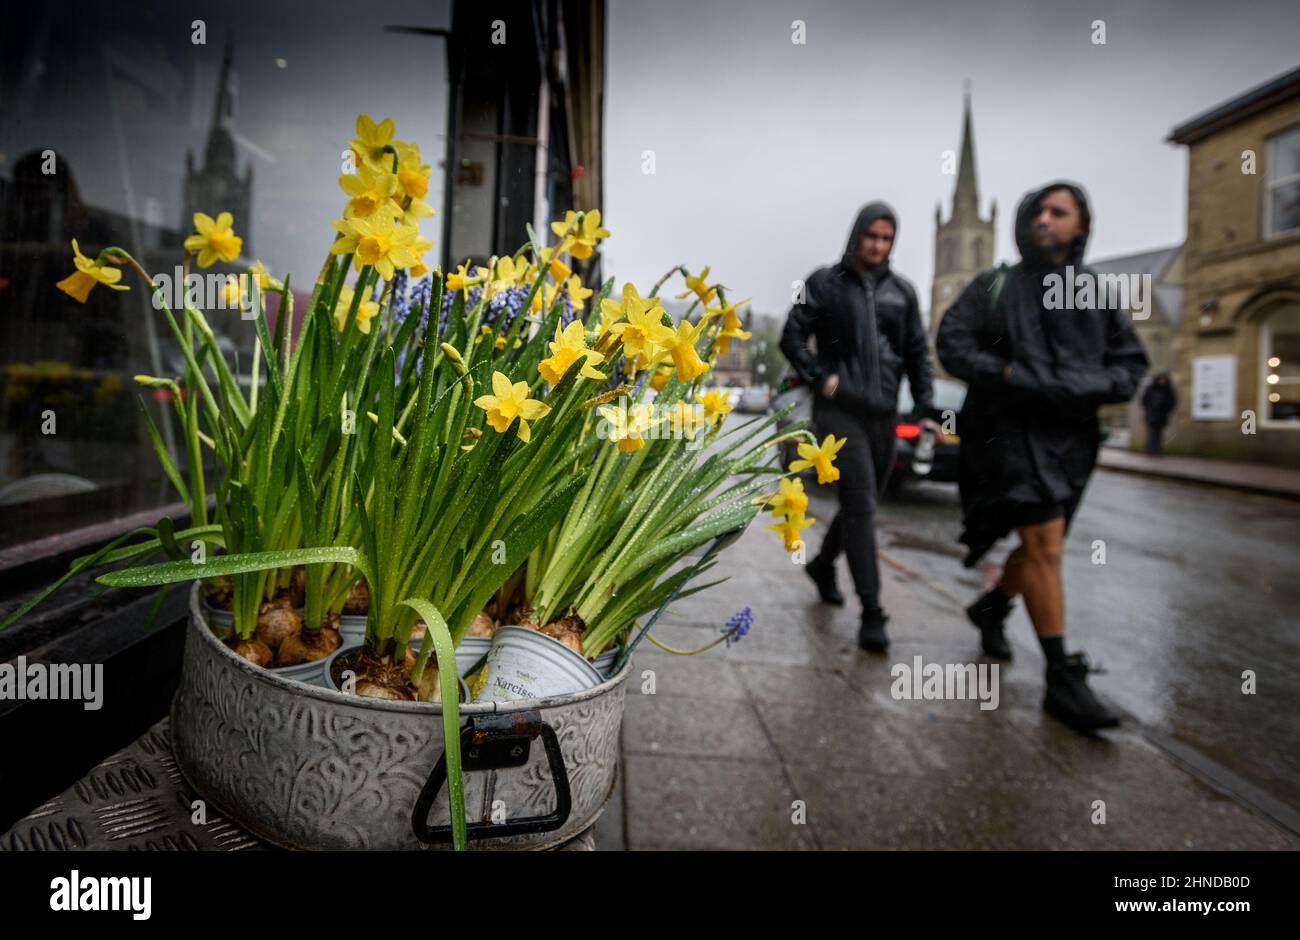 Ramsbottom, Lancashire, UK, Wednesday February 16, 2022. The start of Storm Dudley hits the North West of England on Bridge Street, Ramsbottom, Lancashire. Rain sodden shoppers pass a vibrant display of daffodils outside a florist shop. Credit: Paul Heyes/Alamy News Live Stock Photo